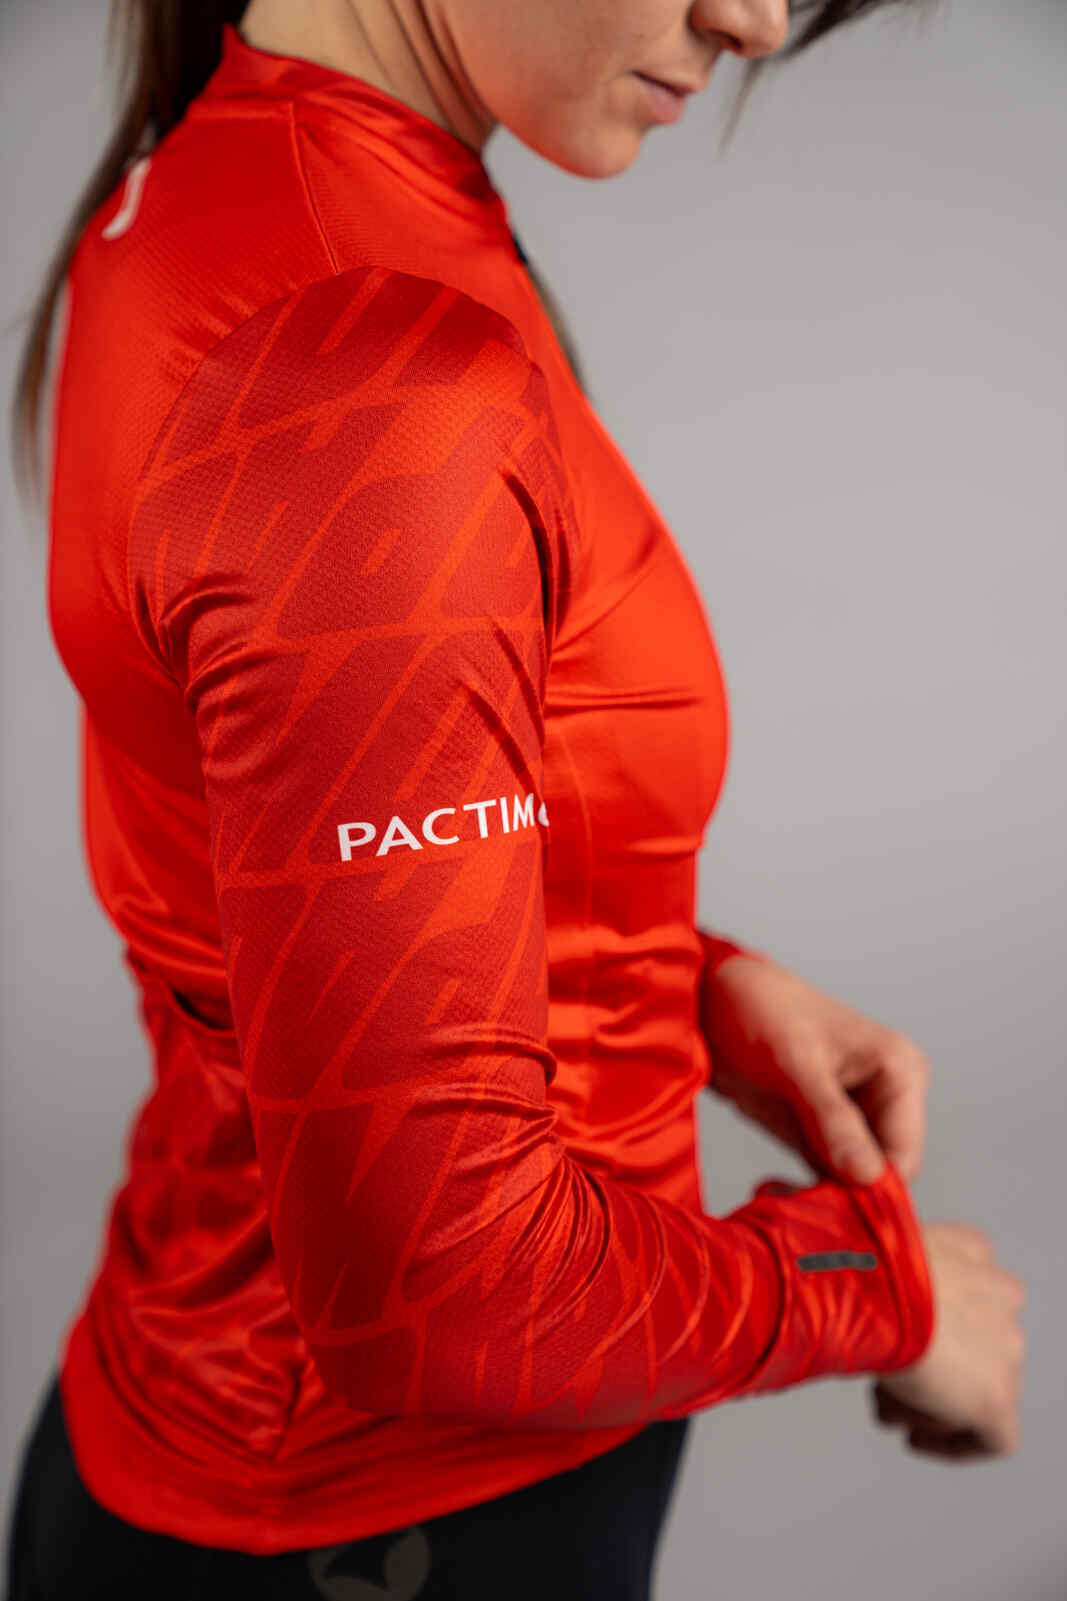 Women's Long Sleeve Red Cycling Jersey - Sleeve Fabric Close-Up